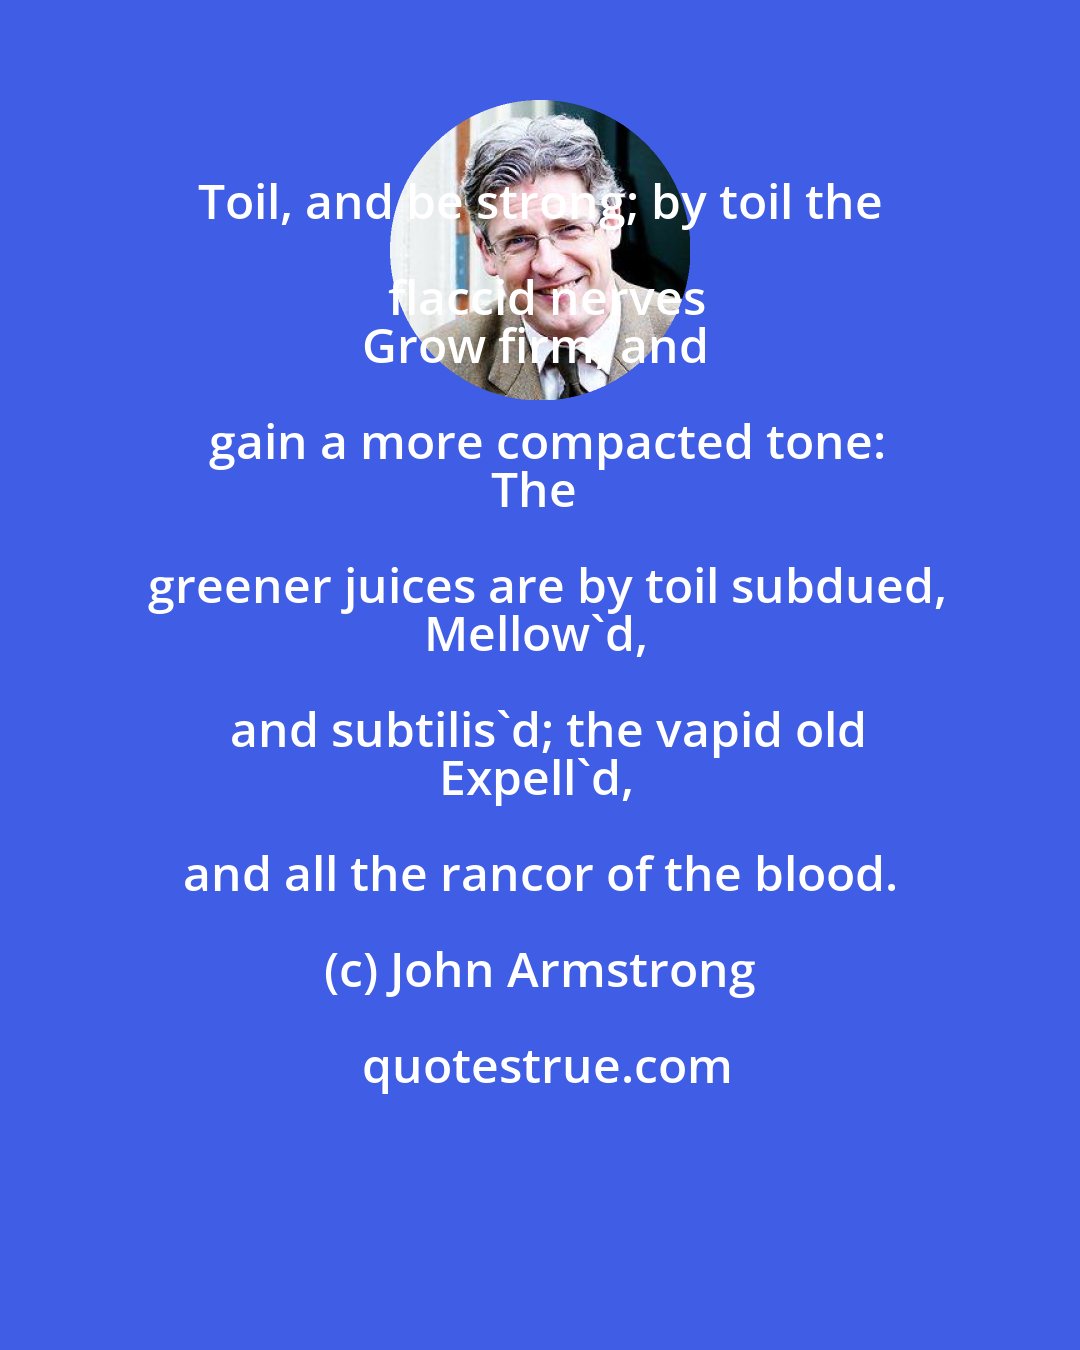 John Armstrong: Toil, and be strong; by toil the flaccid nerves
Grow firm, and gain a more compacted tone:
The greener juices are by toil subdued,
Mellow'd, and subtilis'd; the vapid old
Expell'd, and all the rancor of the blood.